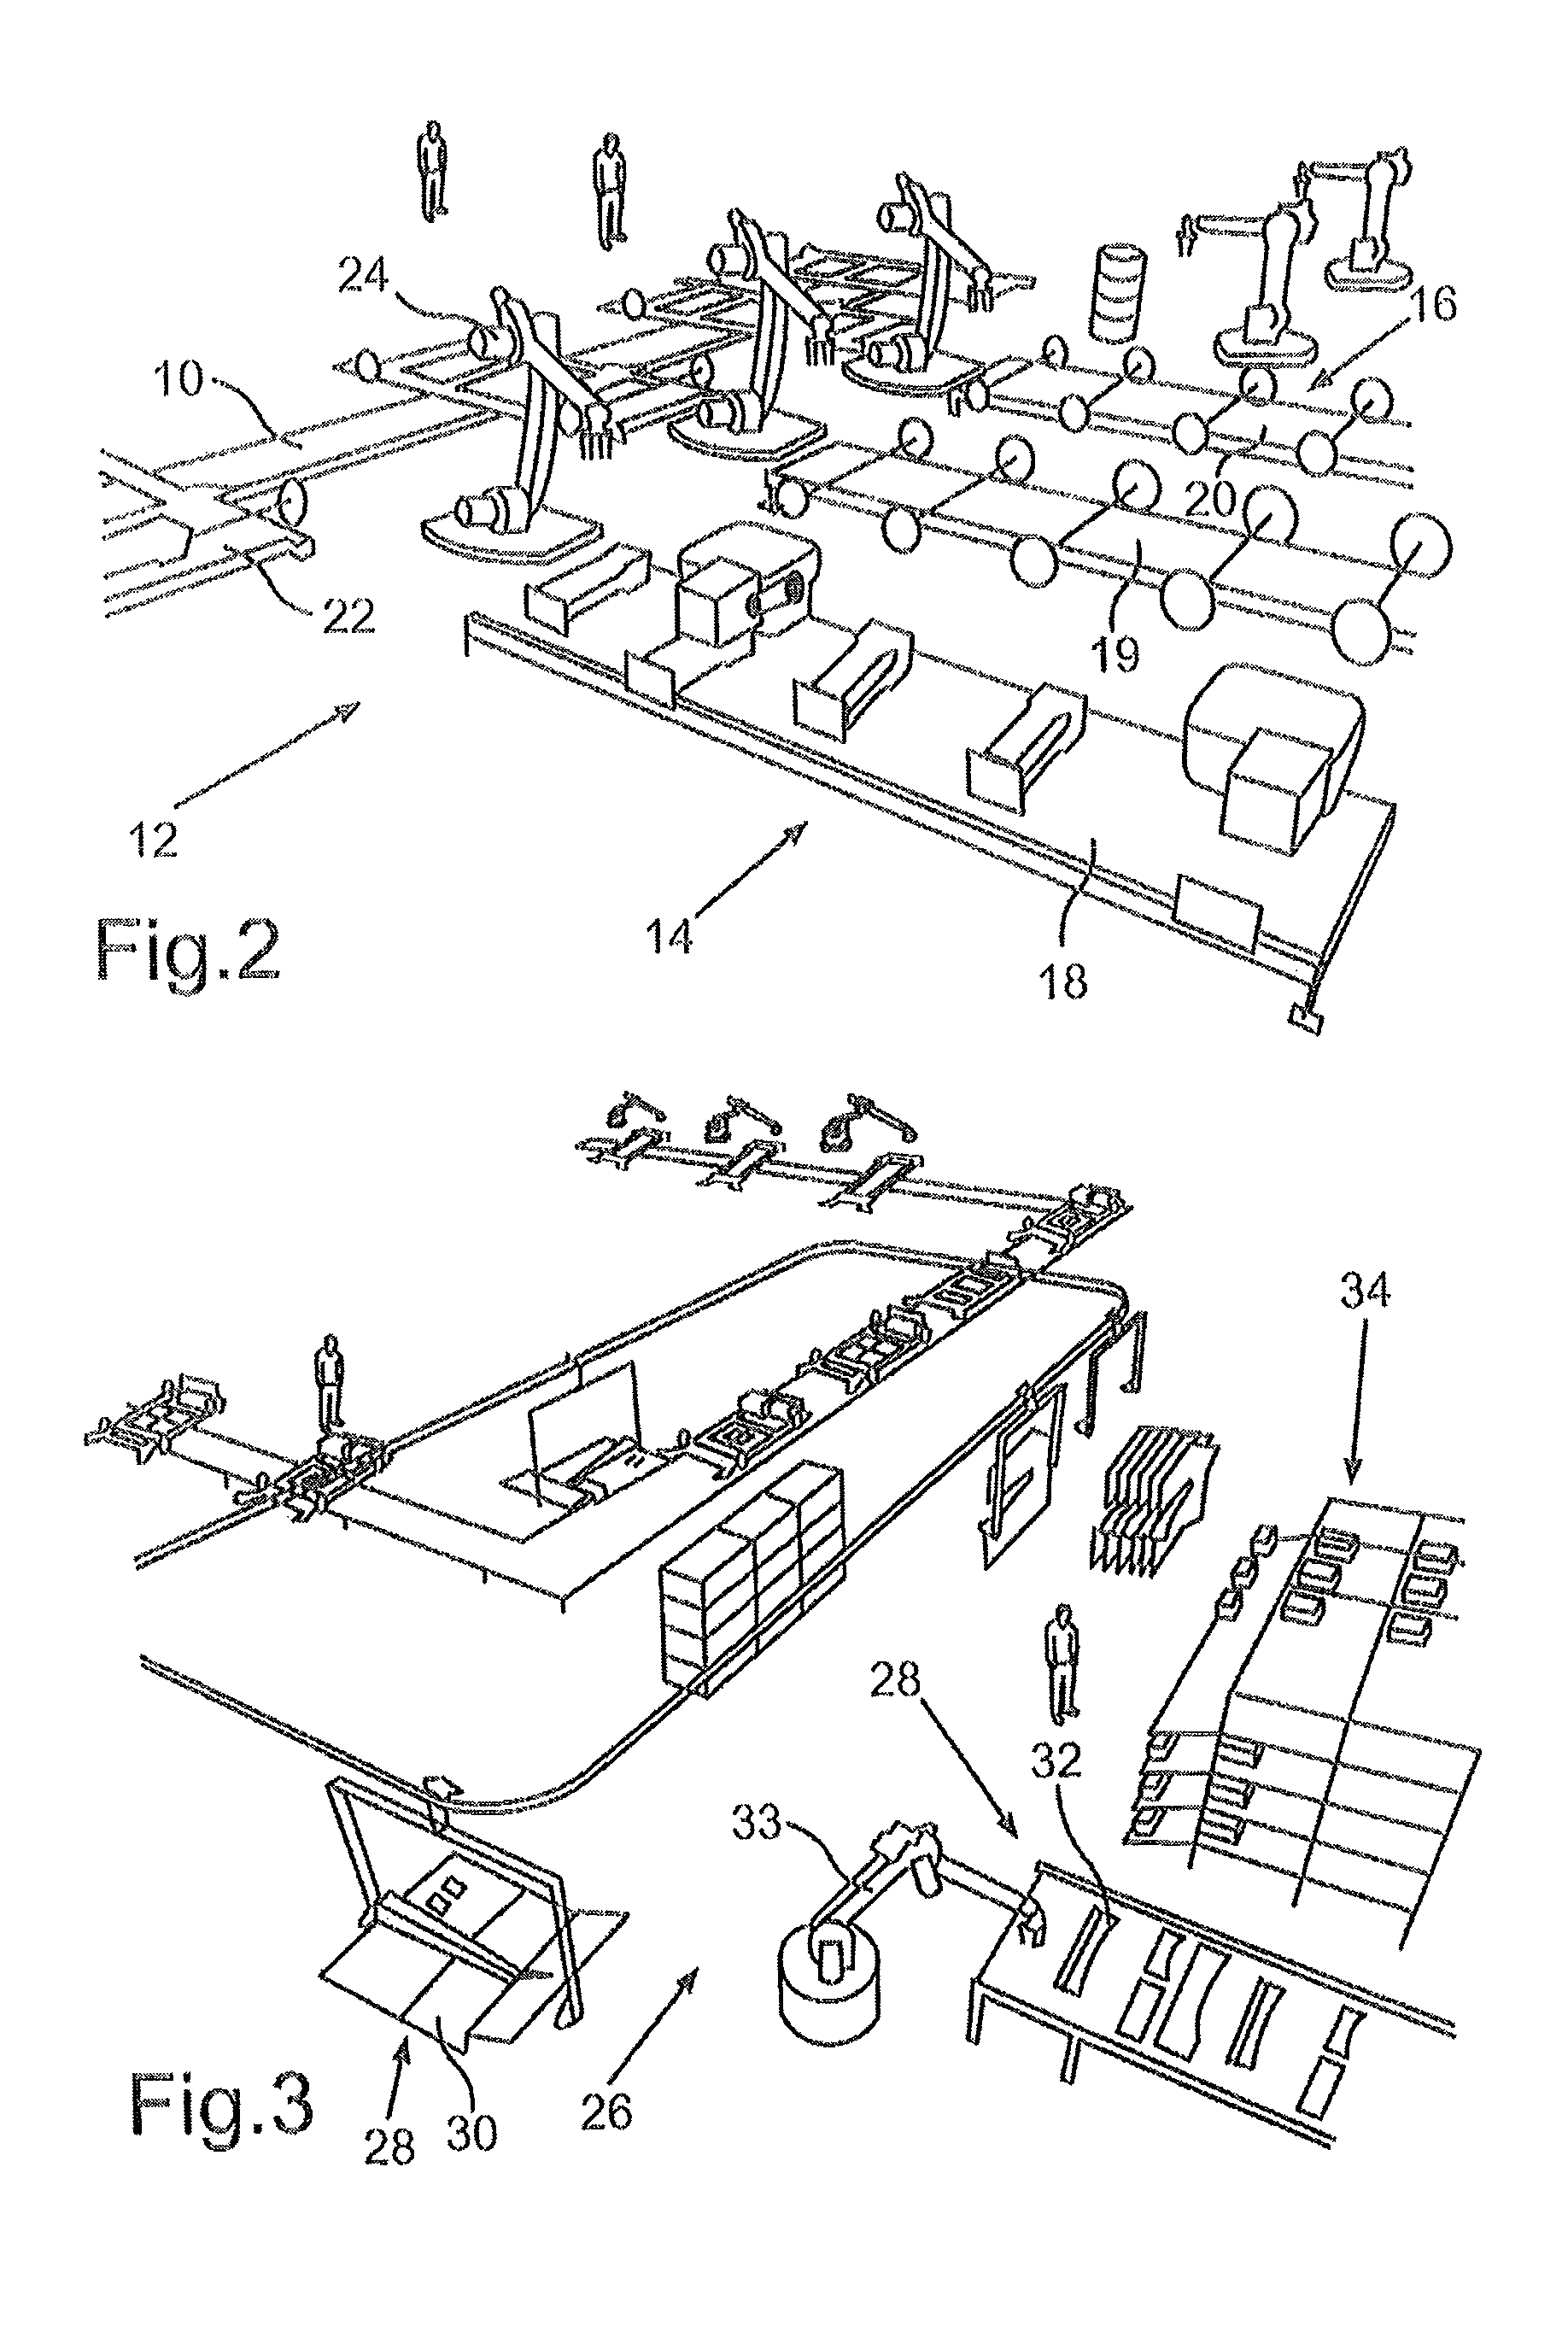 Method for fitting motor vehicle suspension systems